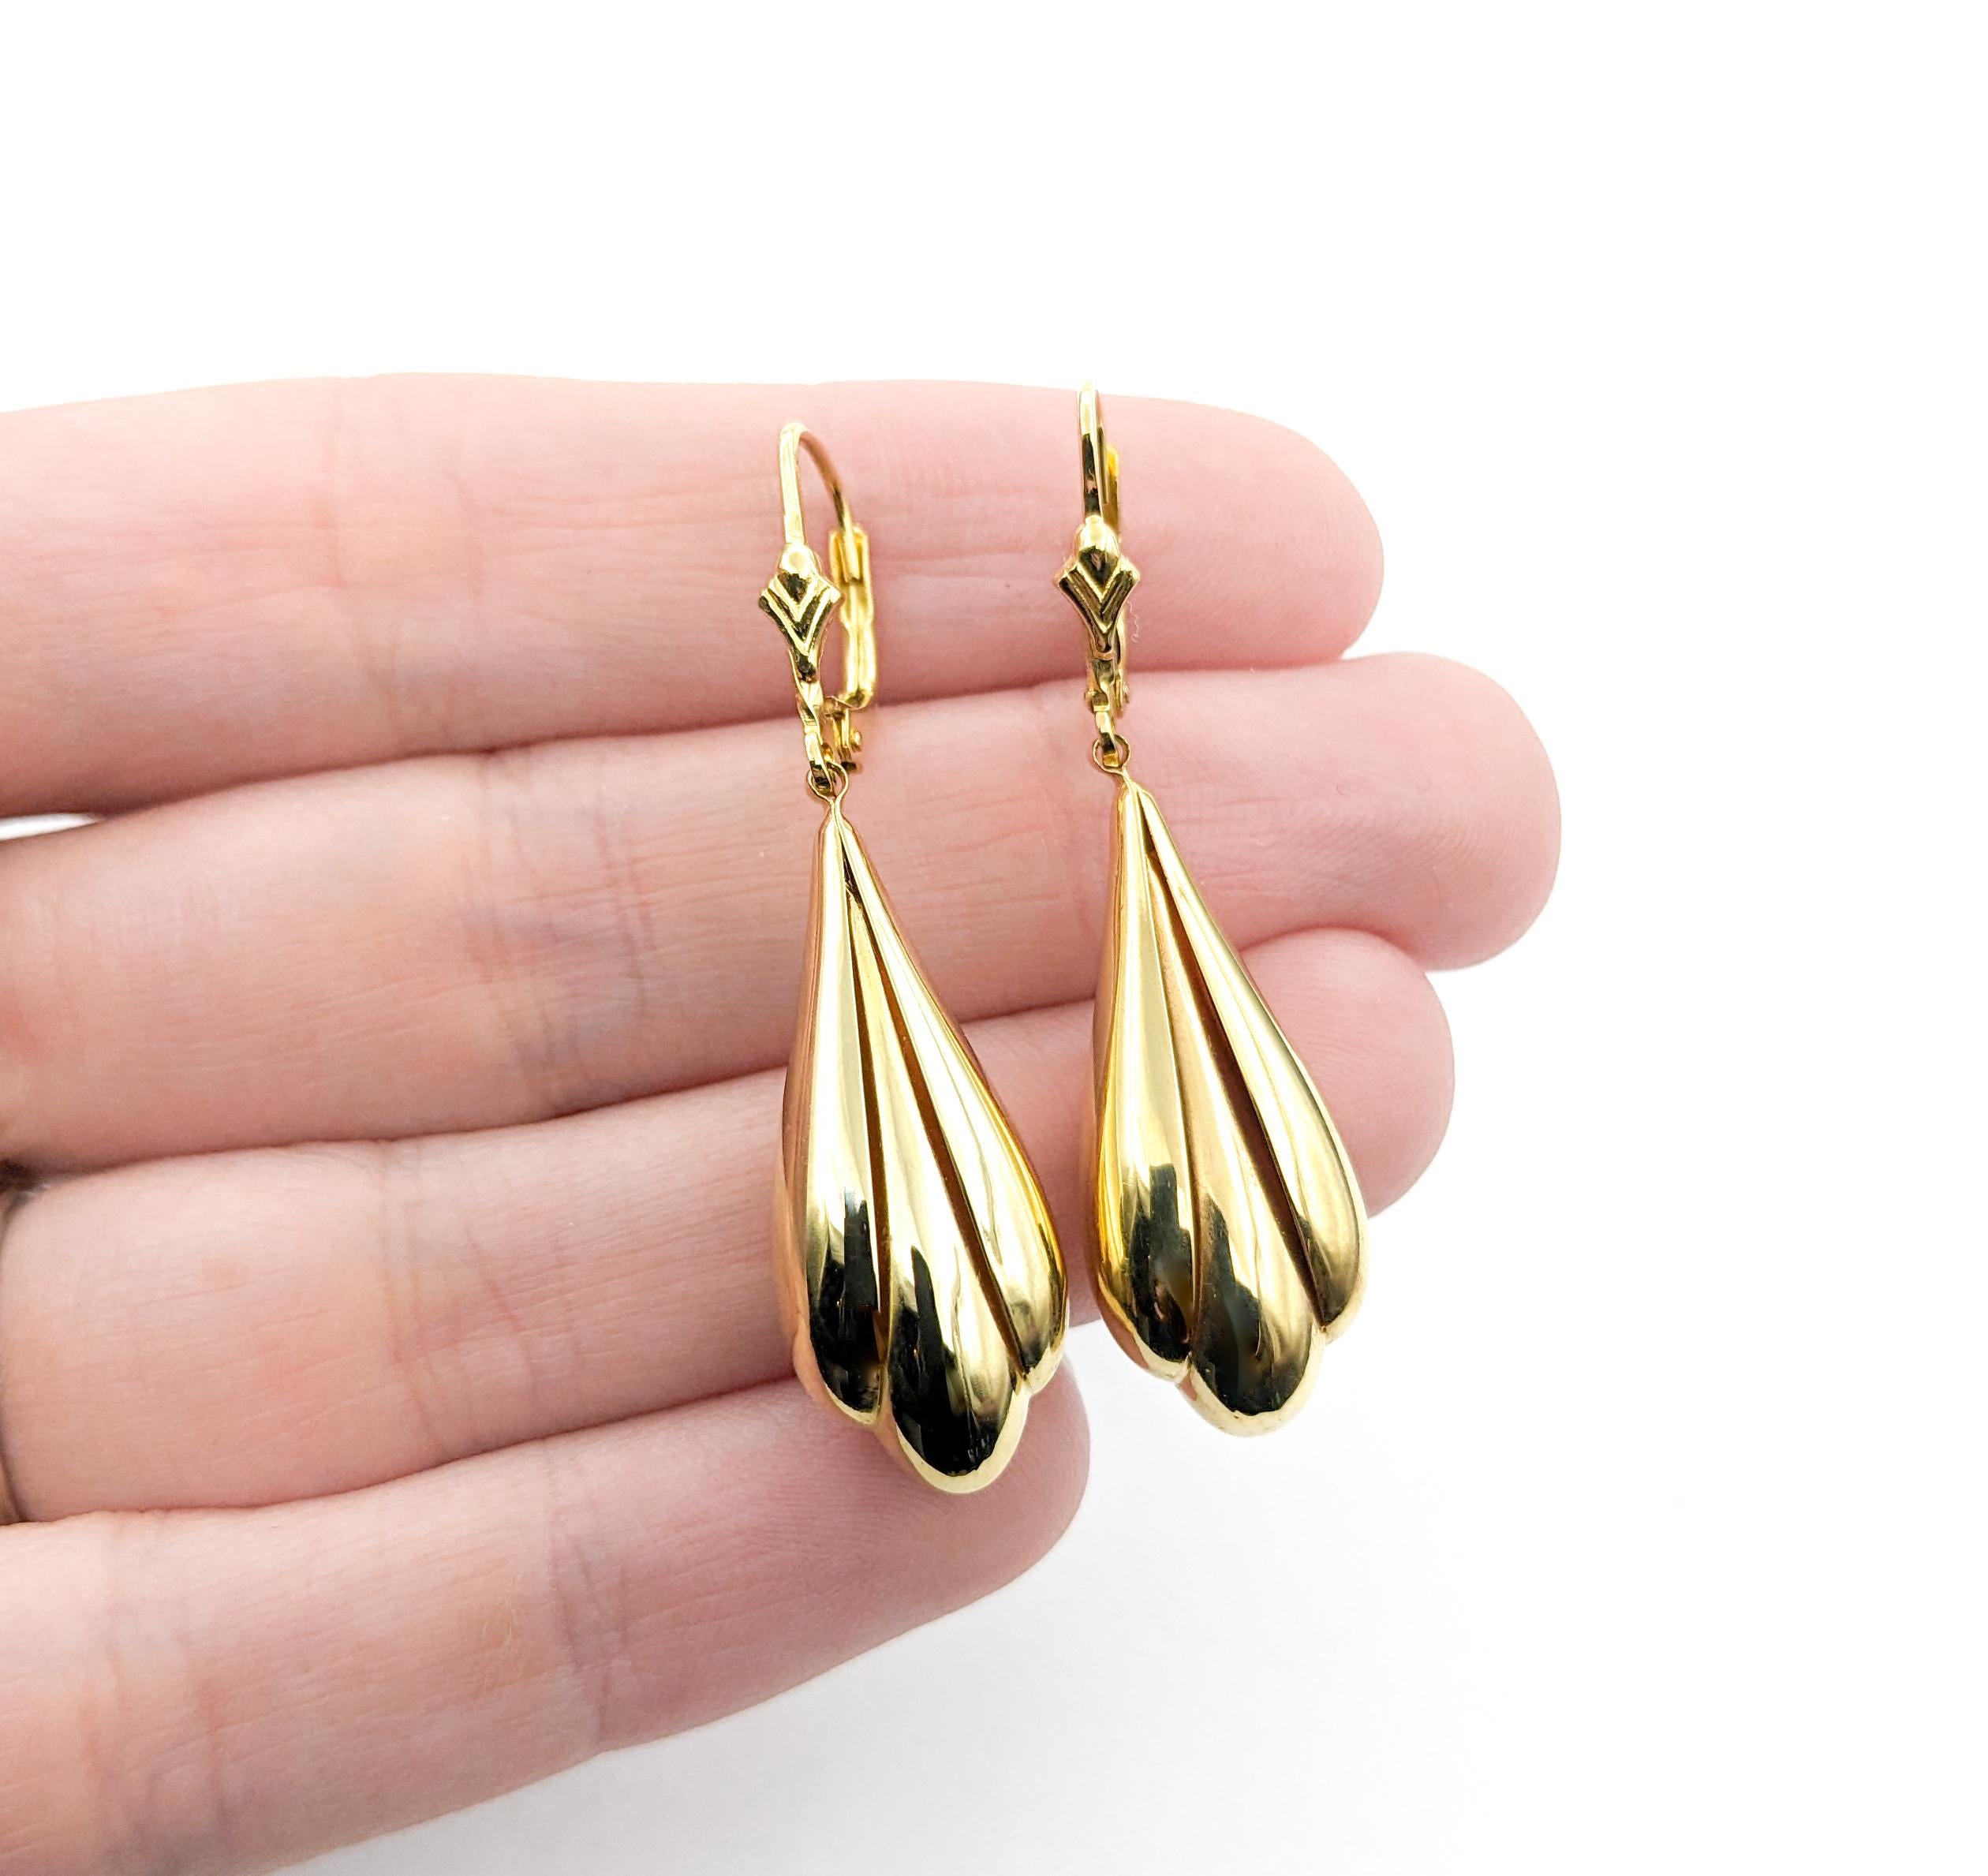 Vintage Dangle Earrings In Yellow Gold In Excellent Condition For Sale In Bloomington, MN